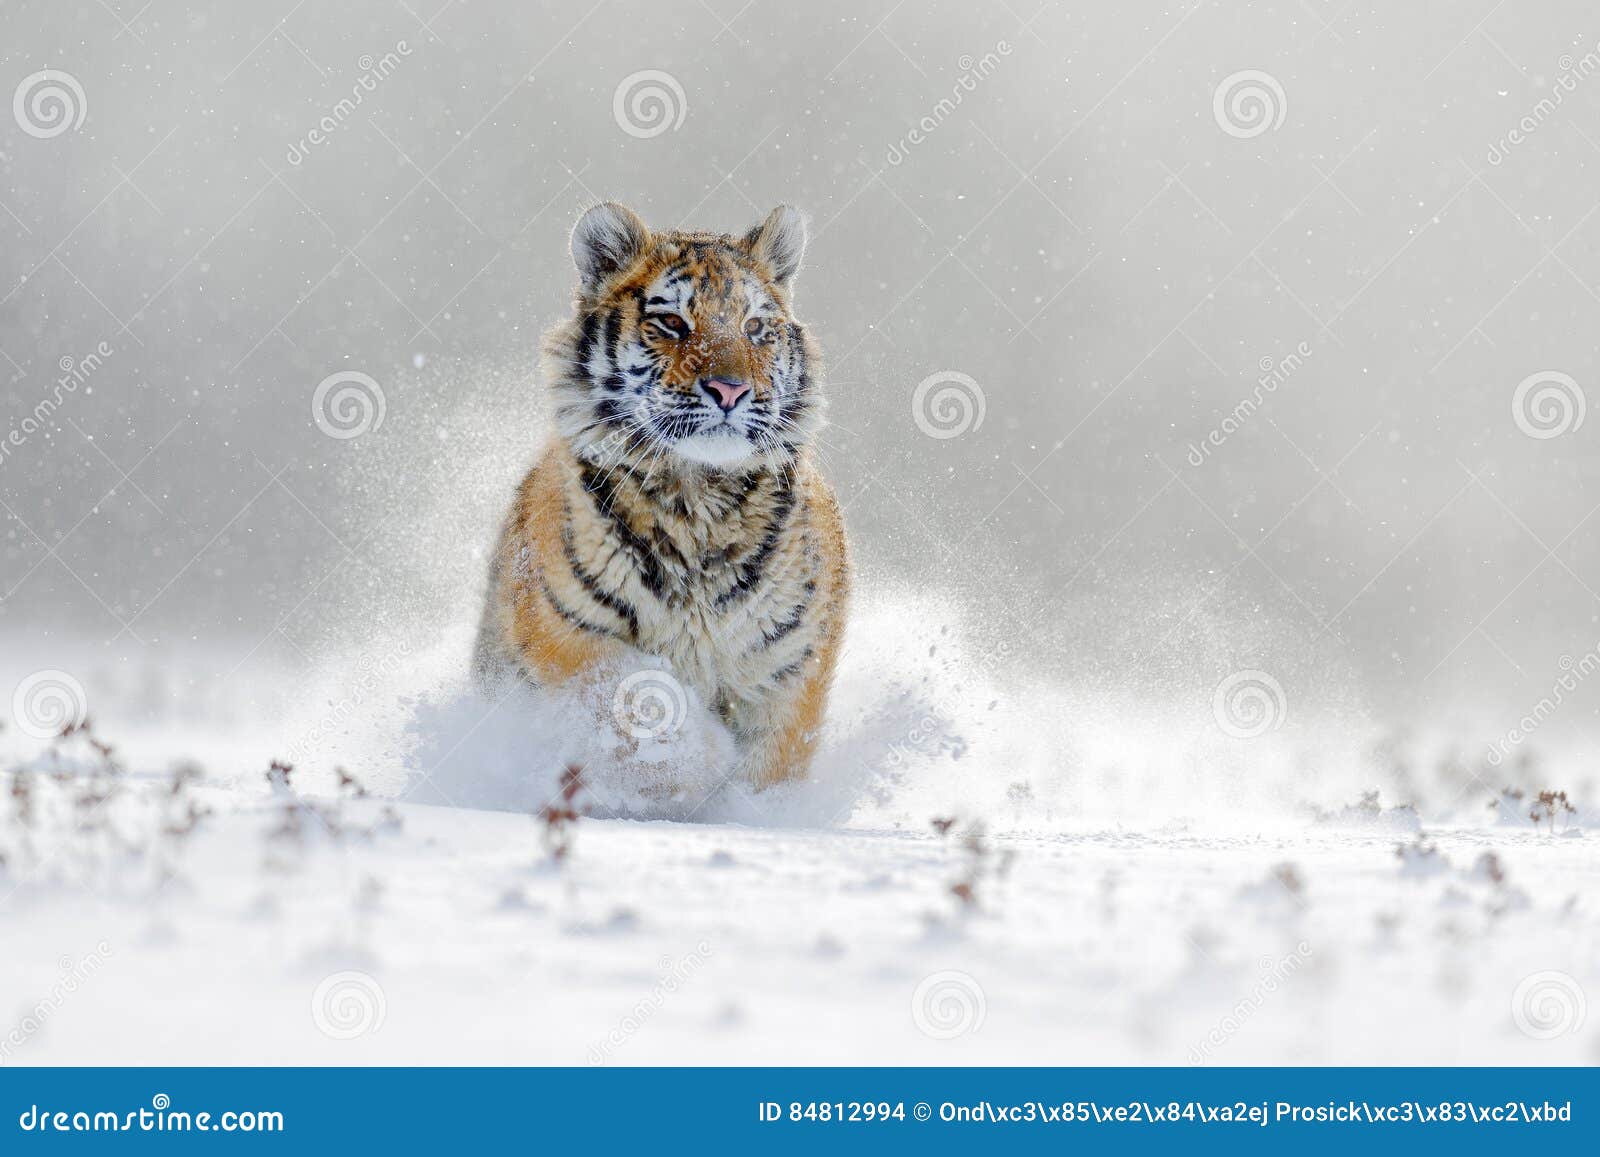 amur tiger running in the snow. tiger in wild winter nature. action wildlife scene with danger animal. cold winter in tajga, russi